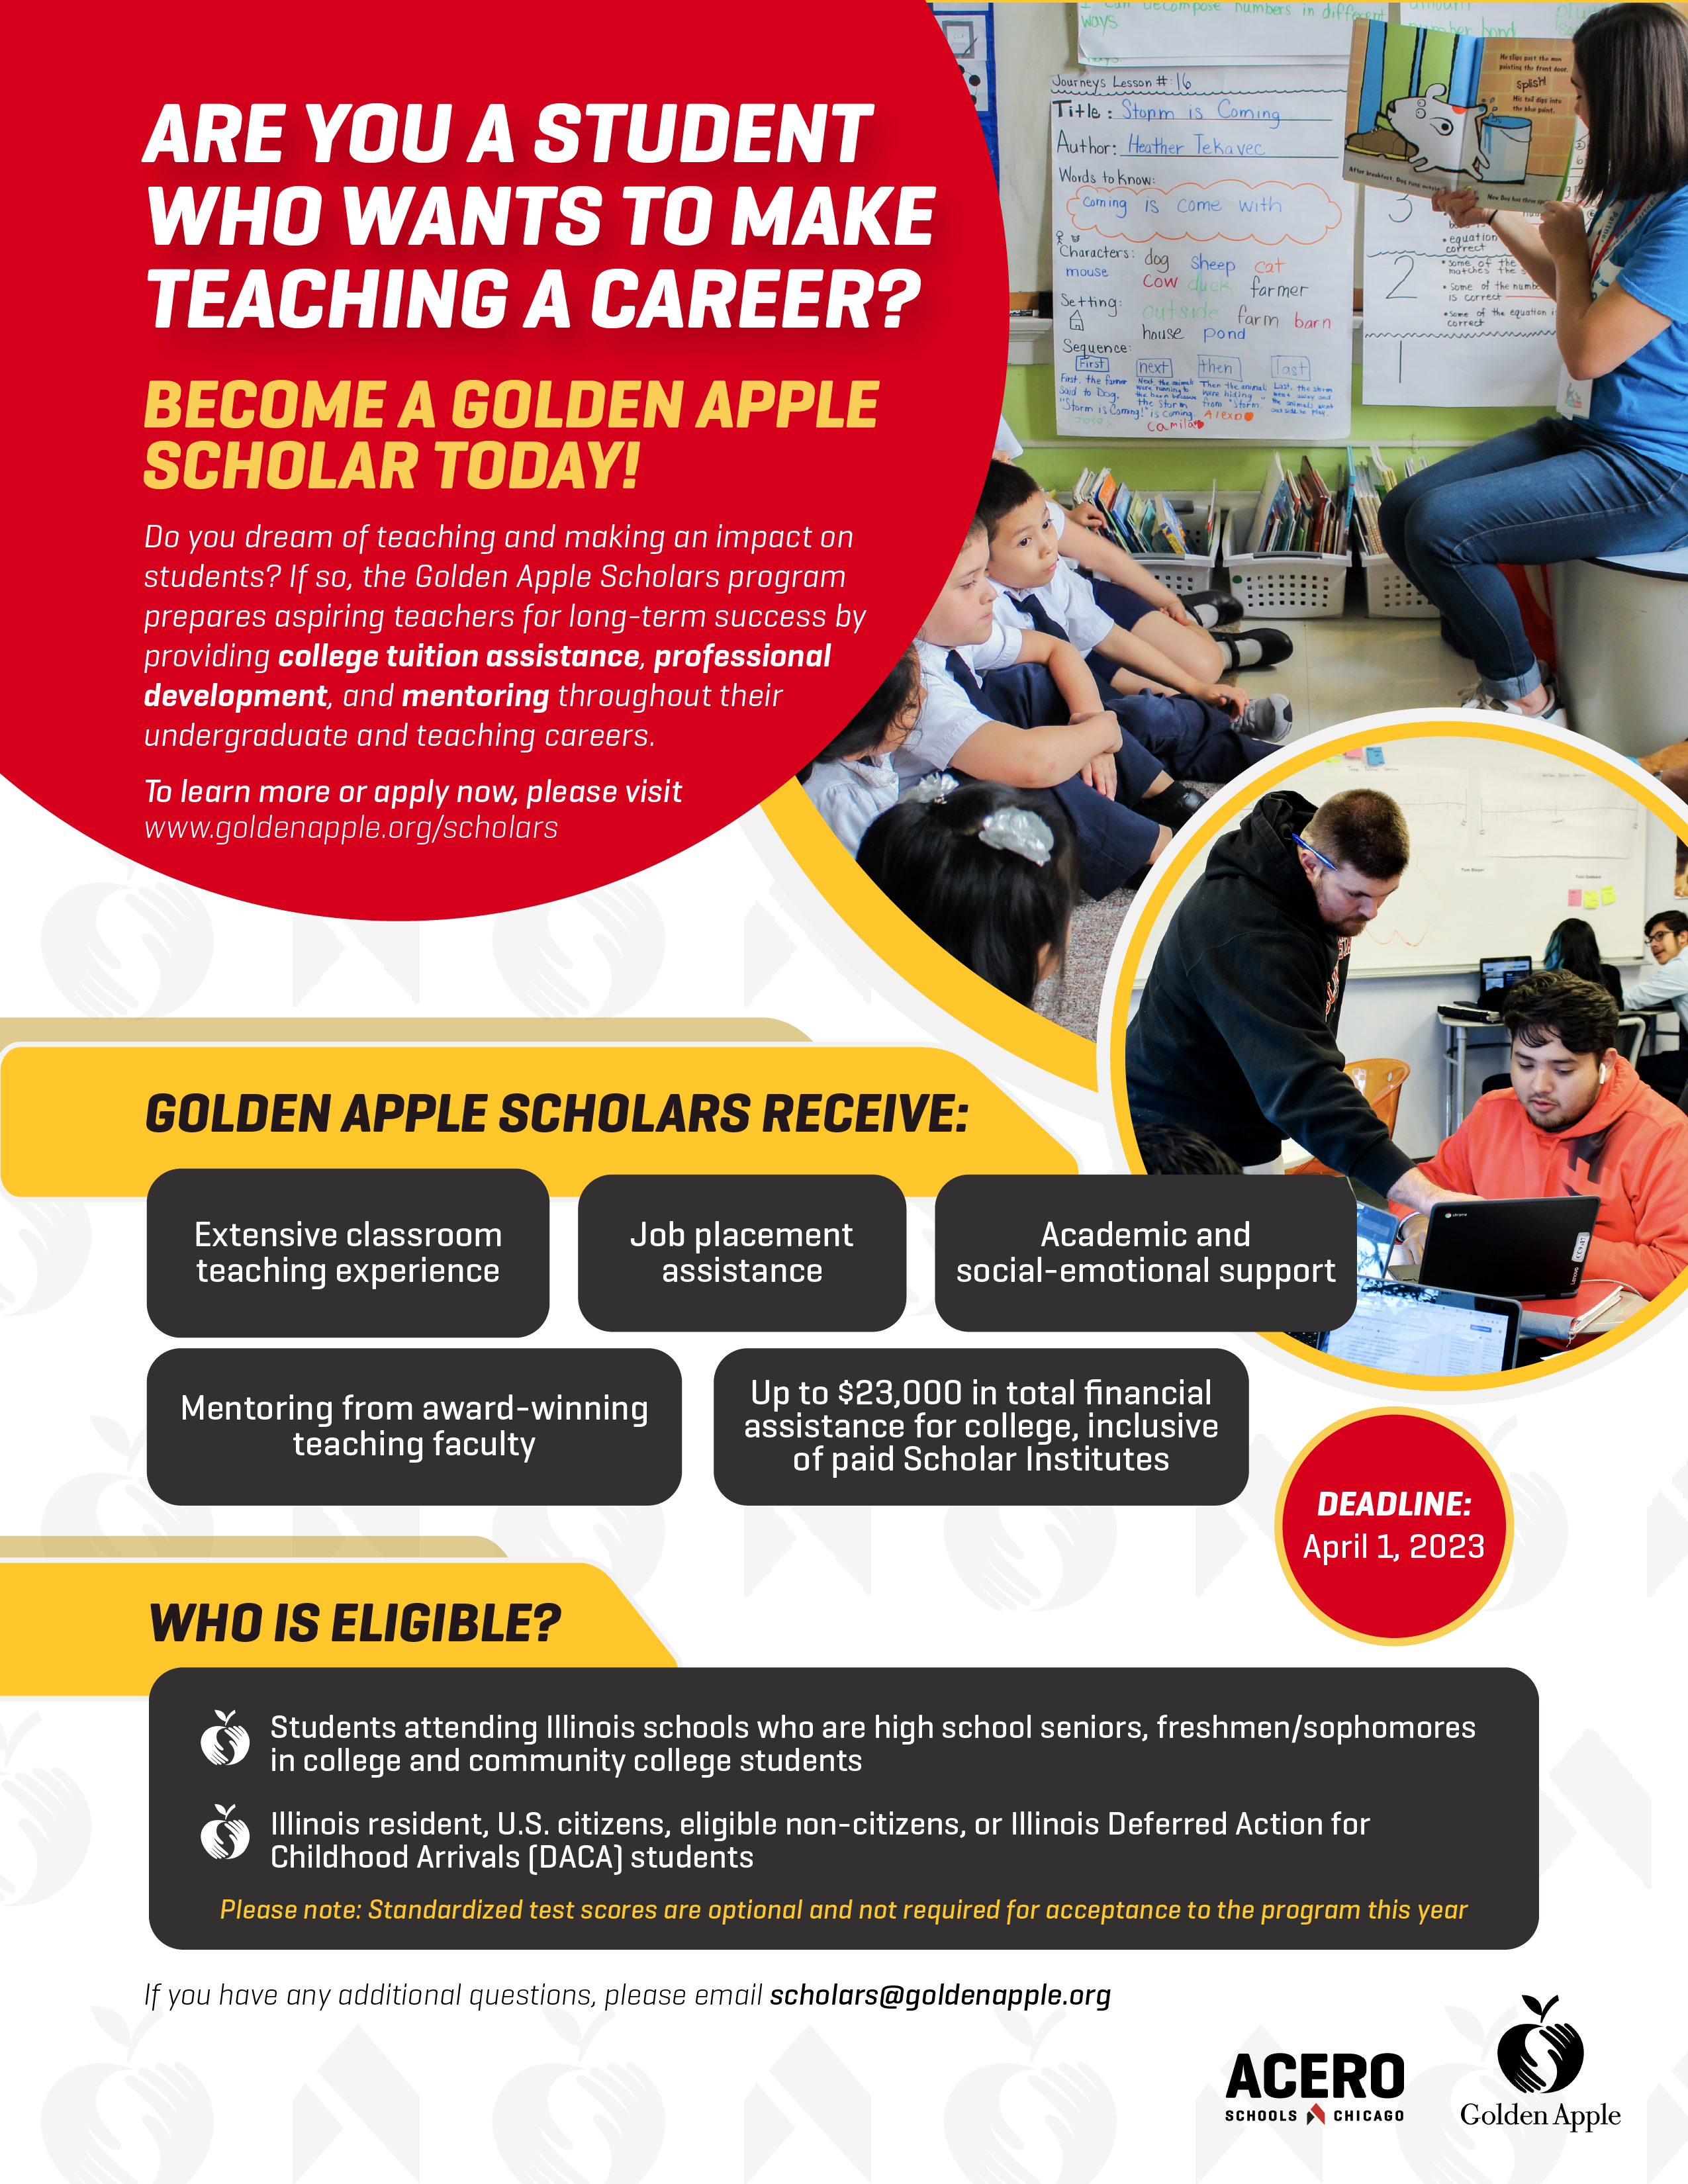  Are you interested in becoming a teacher and one day changing the lives of scholars like you? Don’t miss this incredible scholarship from Golden Apple that includes up to $23,000 in tuition, job placement assistance, mentoring, social-emotional support and more. Learn more and apply at goldenapple.org/scholars